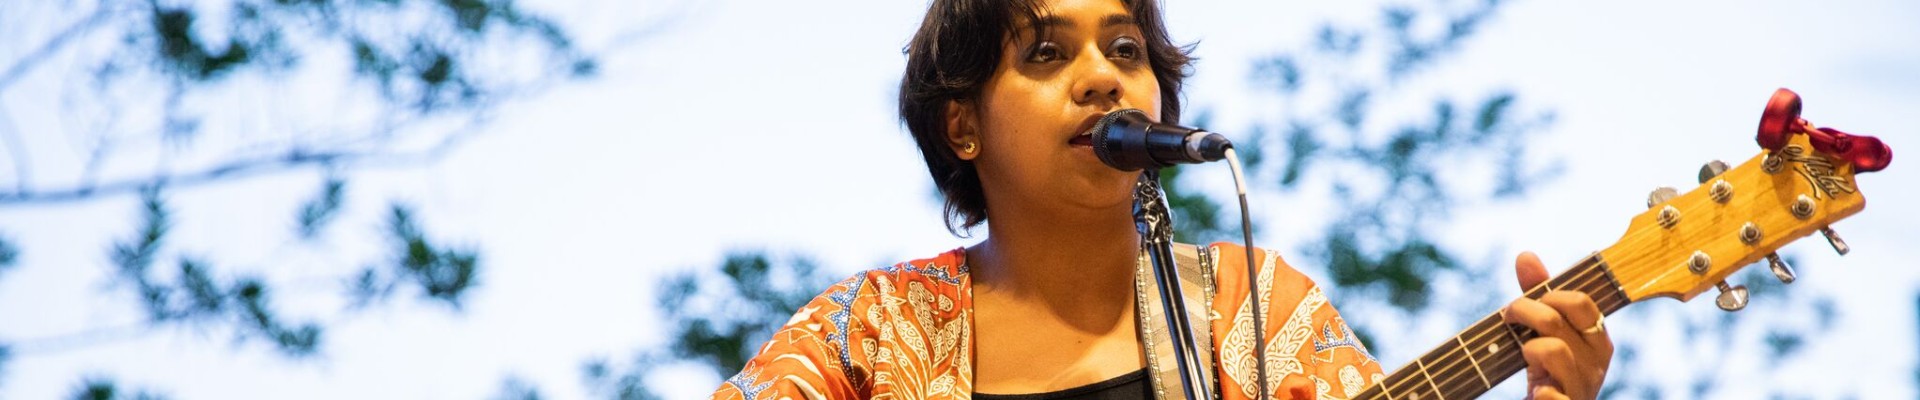 Emily Wurramara performing on the Queensland Terrace at the Minya Birran Celebration 21 February 2020 httpswwwslqqldgovauwhats-onminya-birran-what-now-indigenous-languages